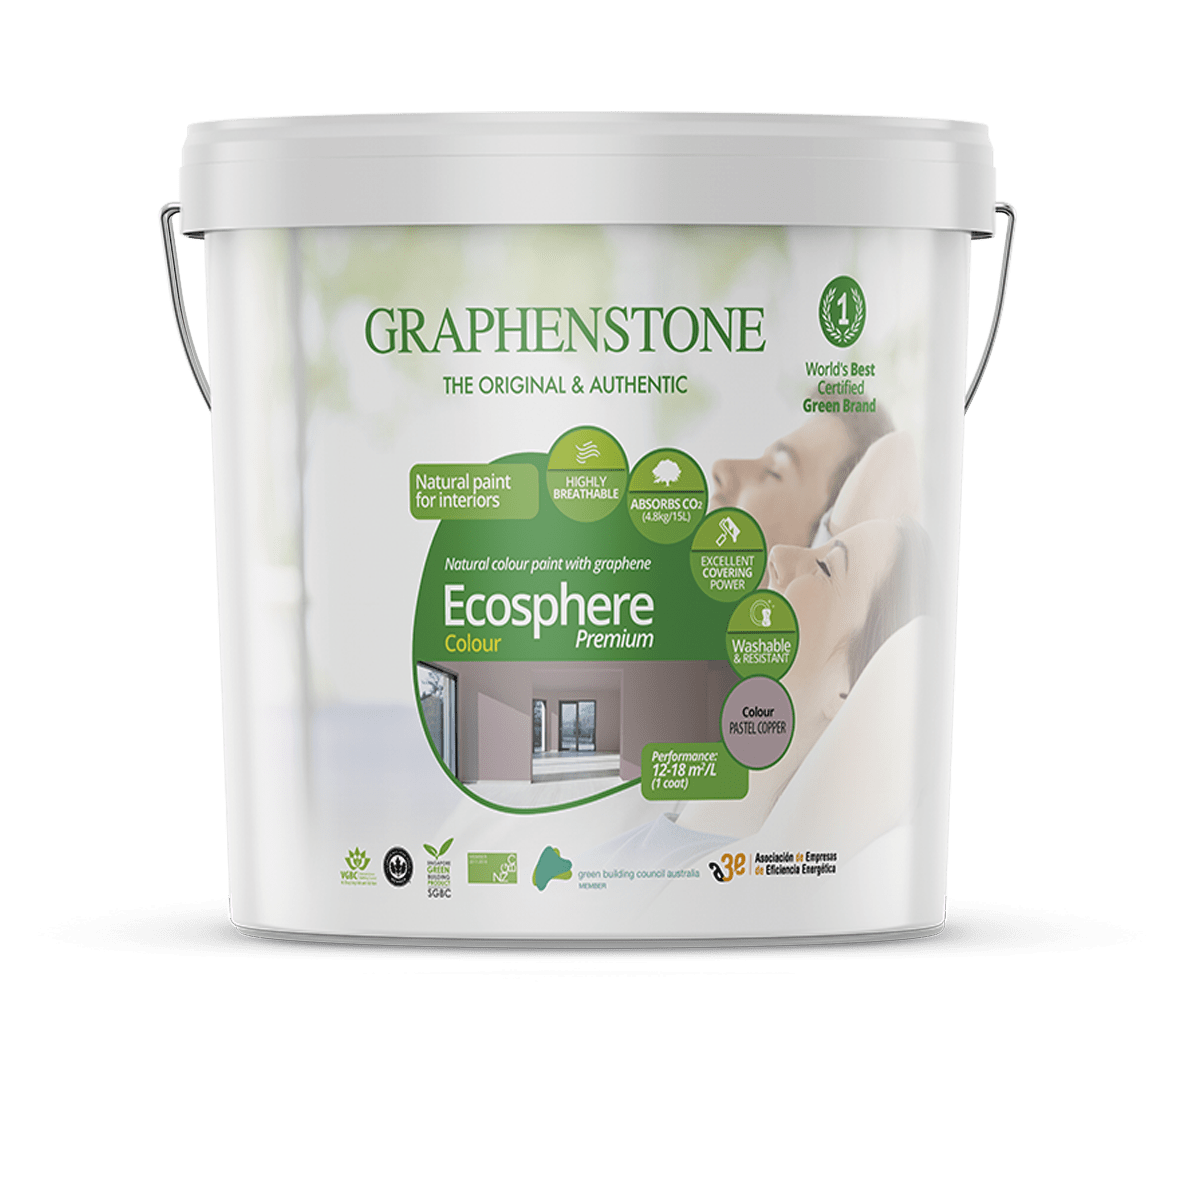 Ecosphere eco friendly interior breathable paint; lime paint absorbs CO2